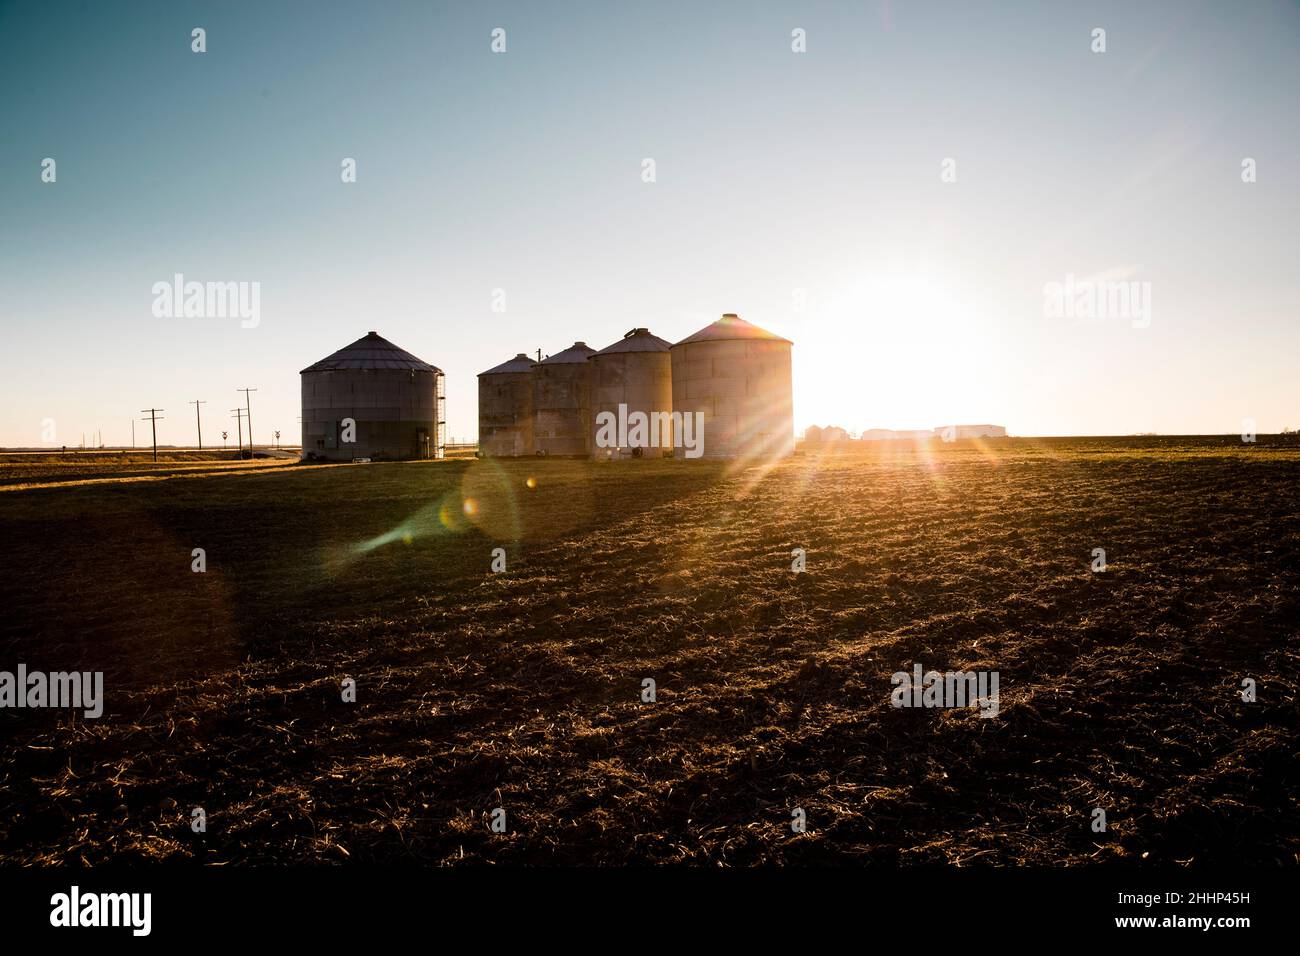 Grain Bins in the Countryside at Sunset Stock Photo